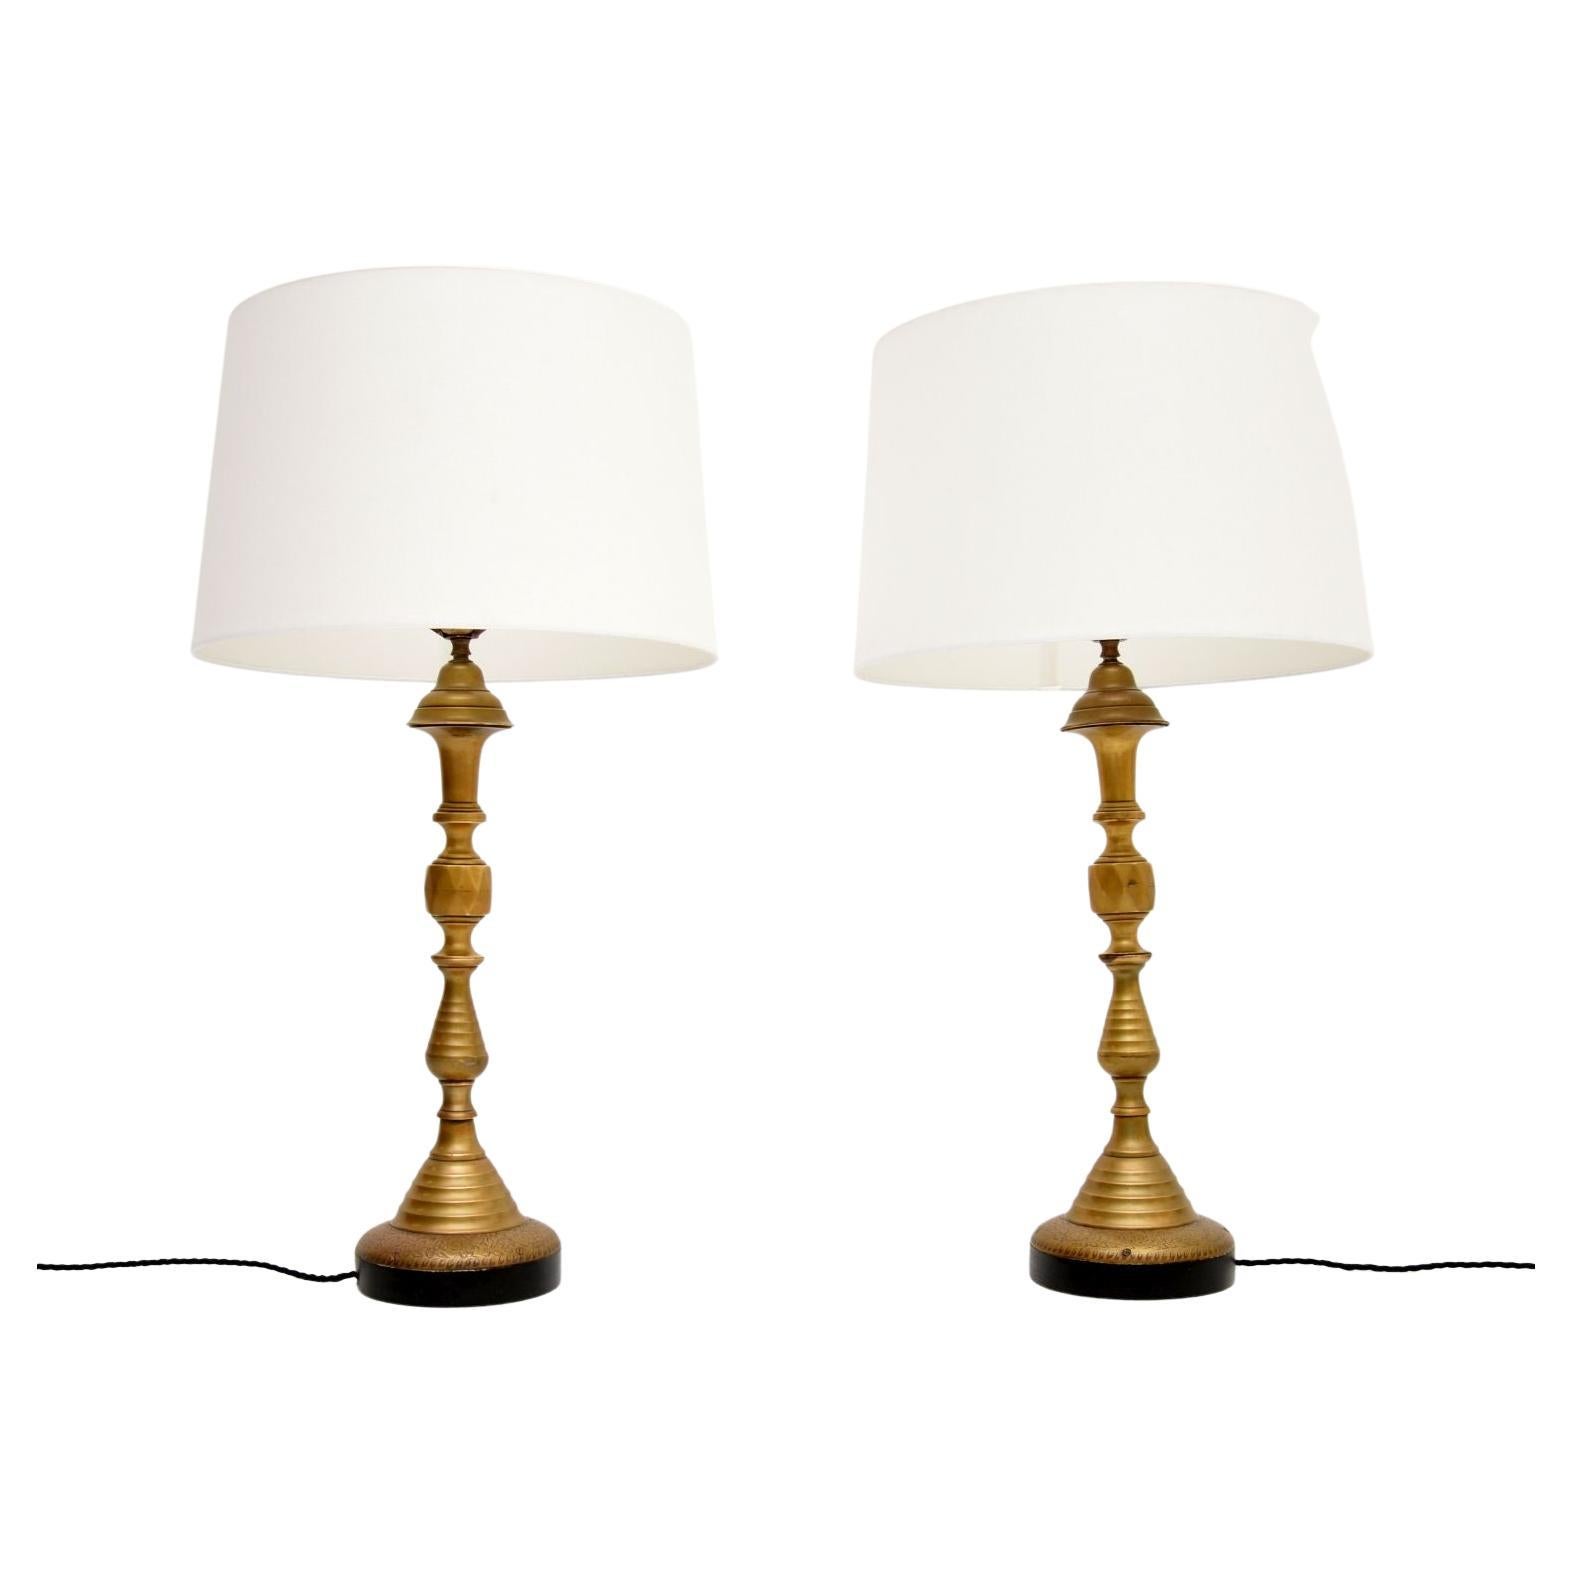 Large Pair of Antique Brass Table Lamps